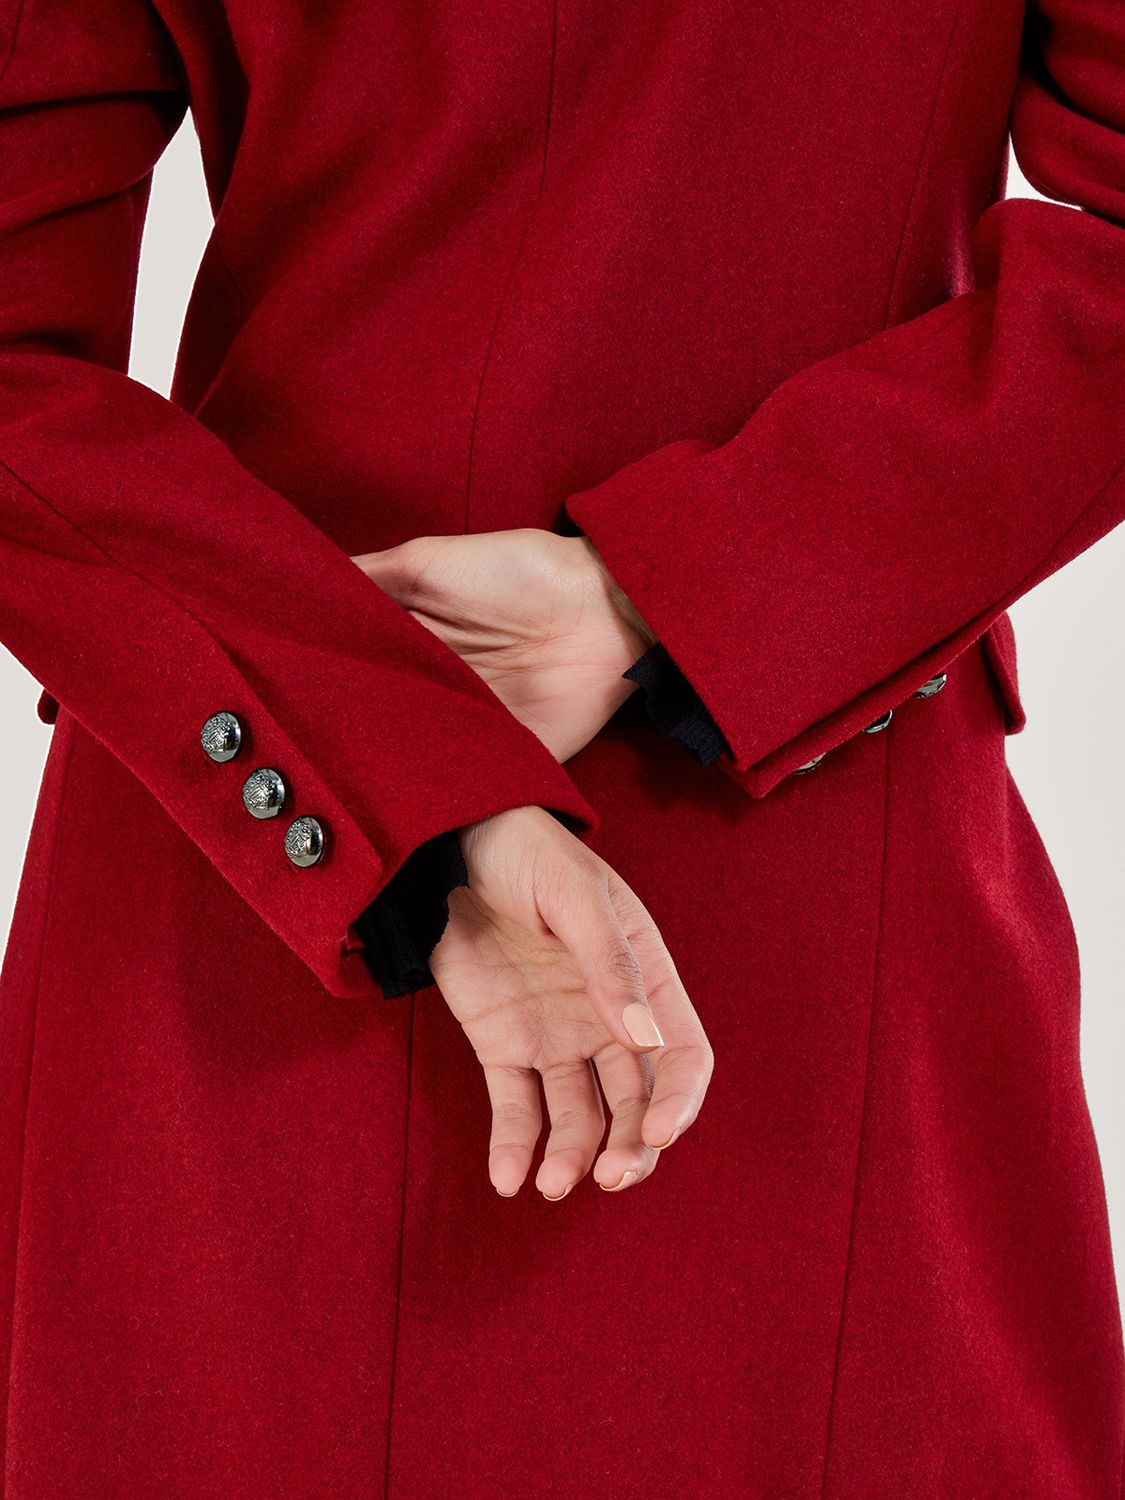 Buy Monsoon Daria Double Breasted Coat, Red Online at johnlewis.com